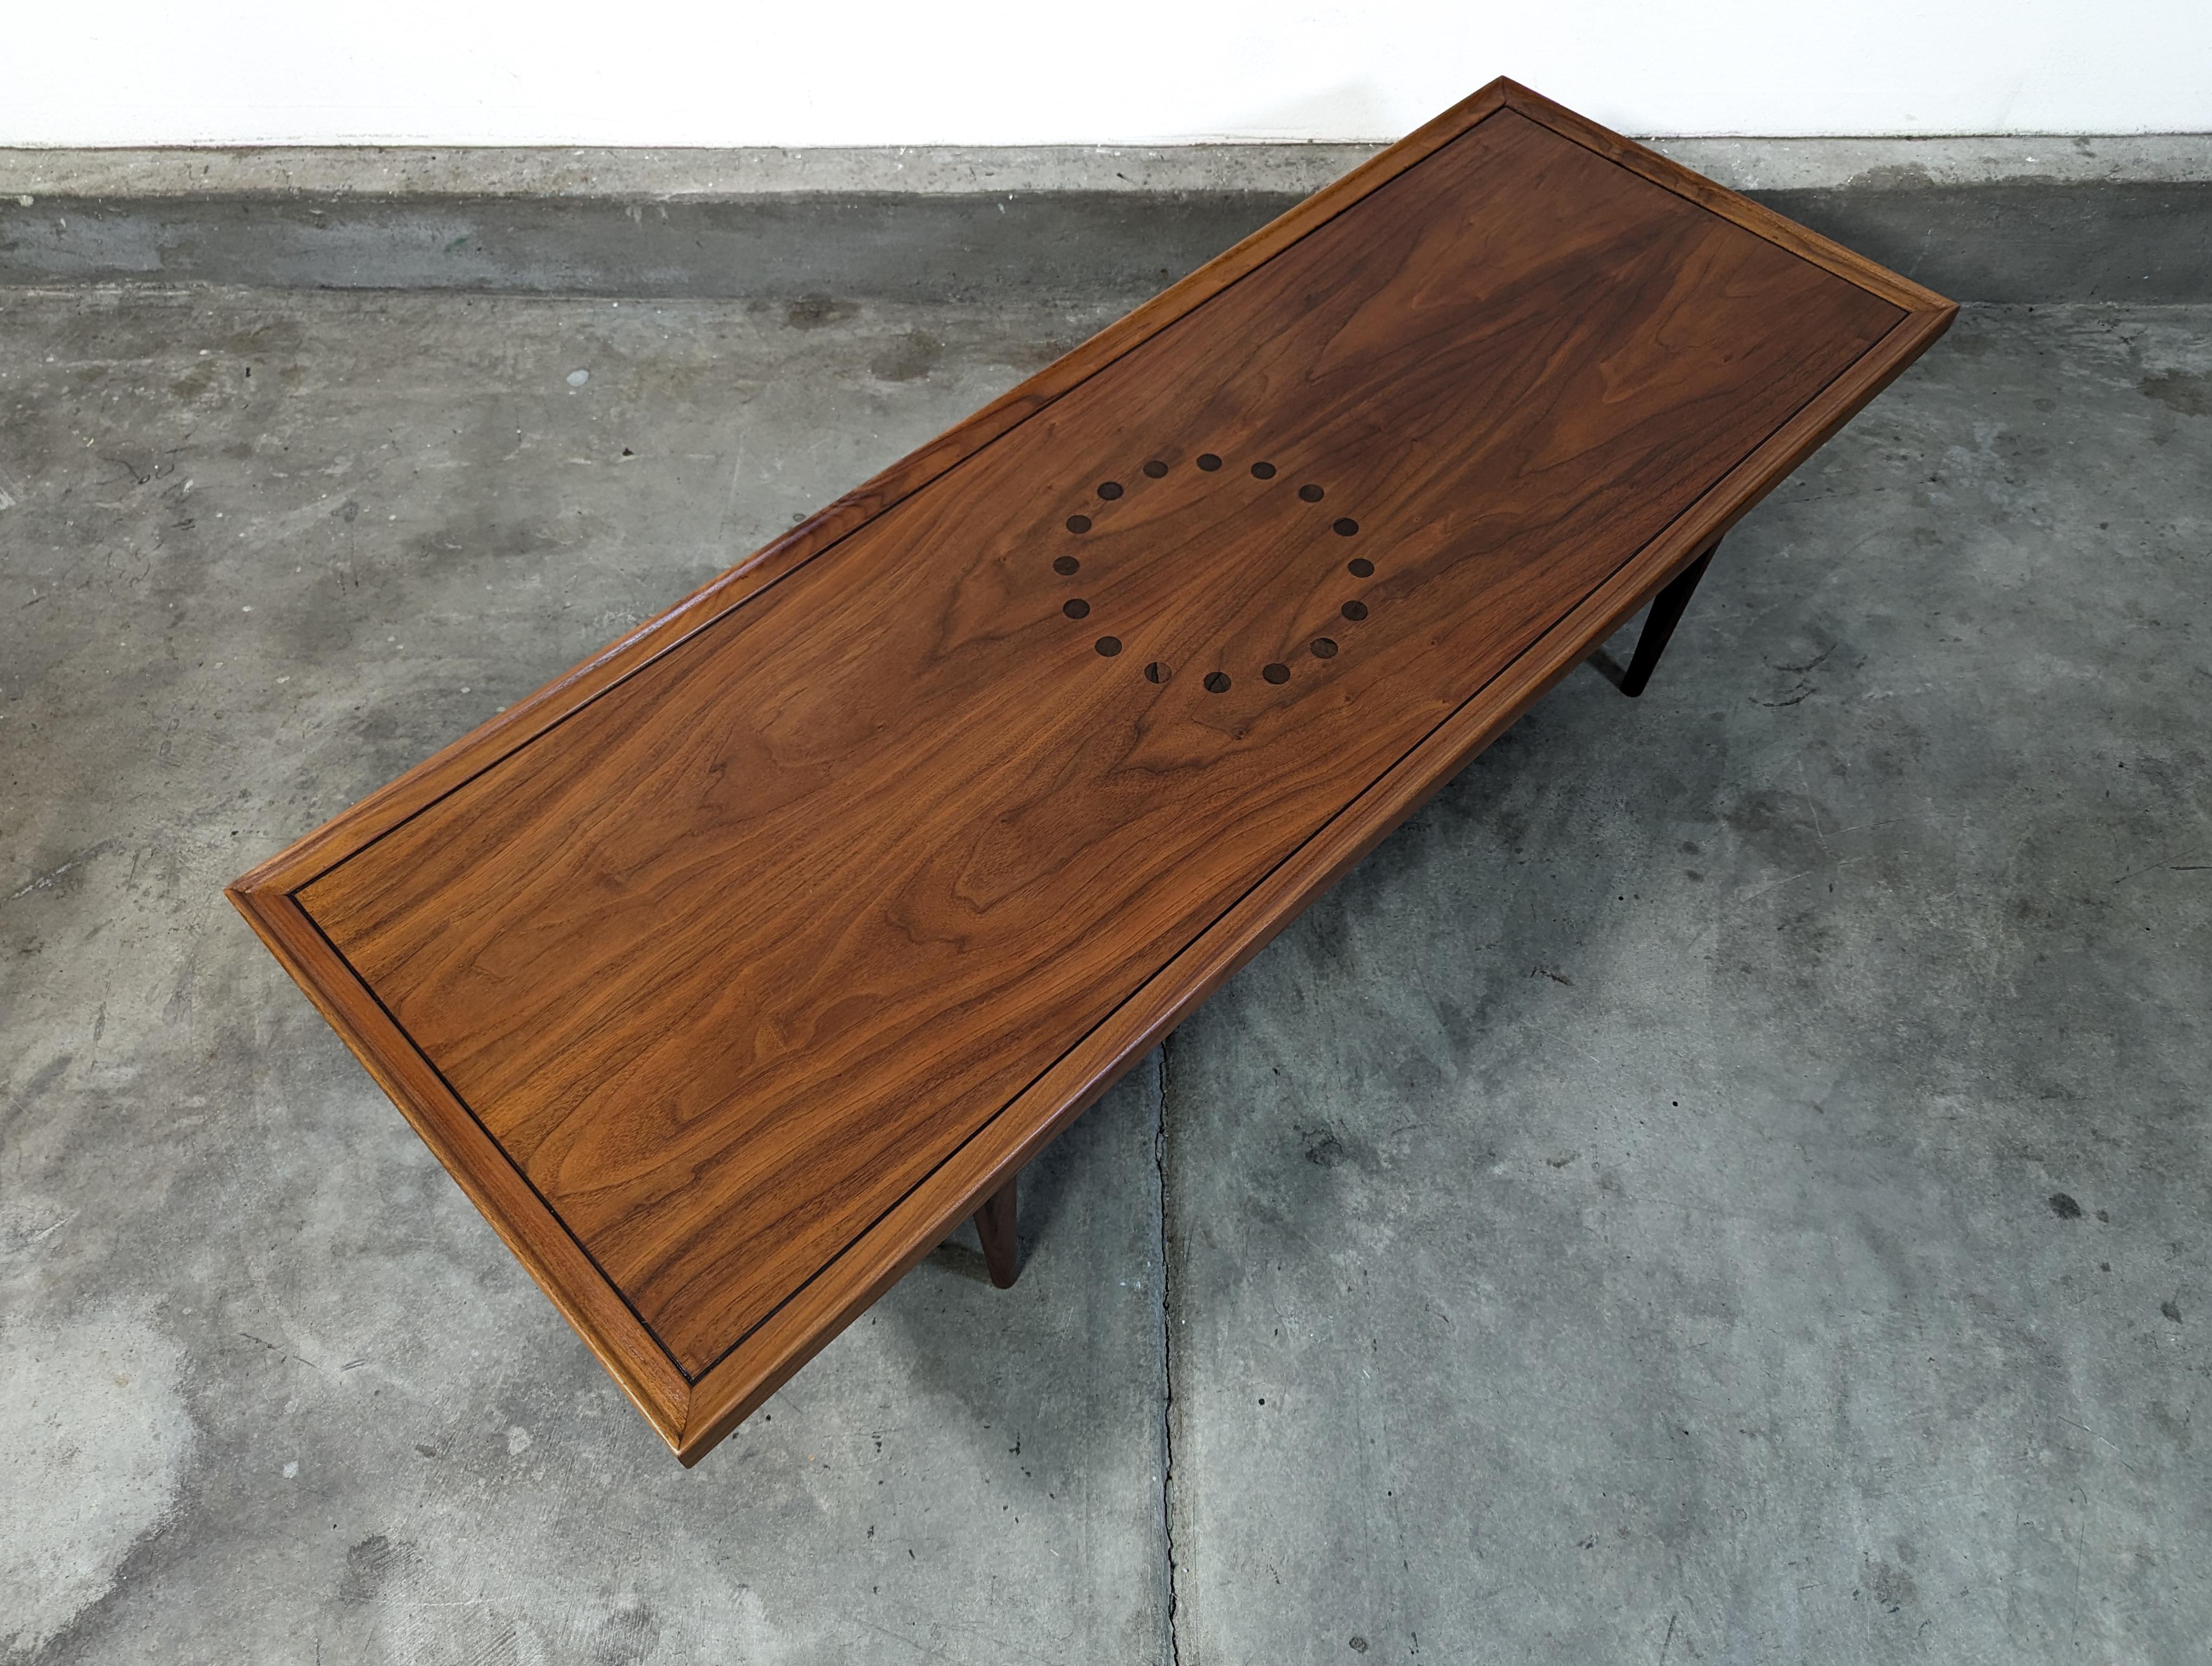 American Mid Century Modern Coffee Table By Drexel, Declaration Line, c1960s For Sale